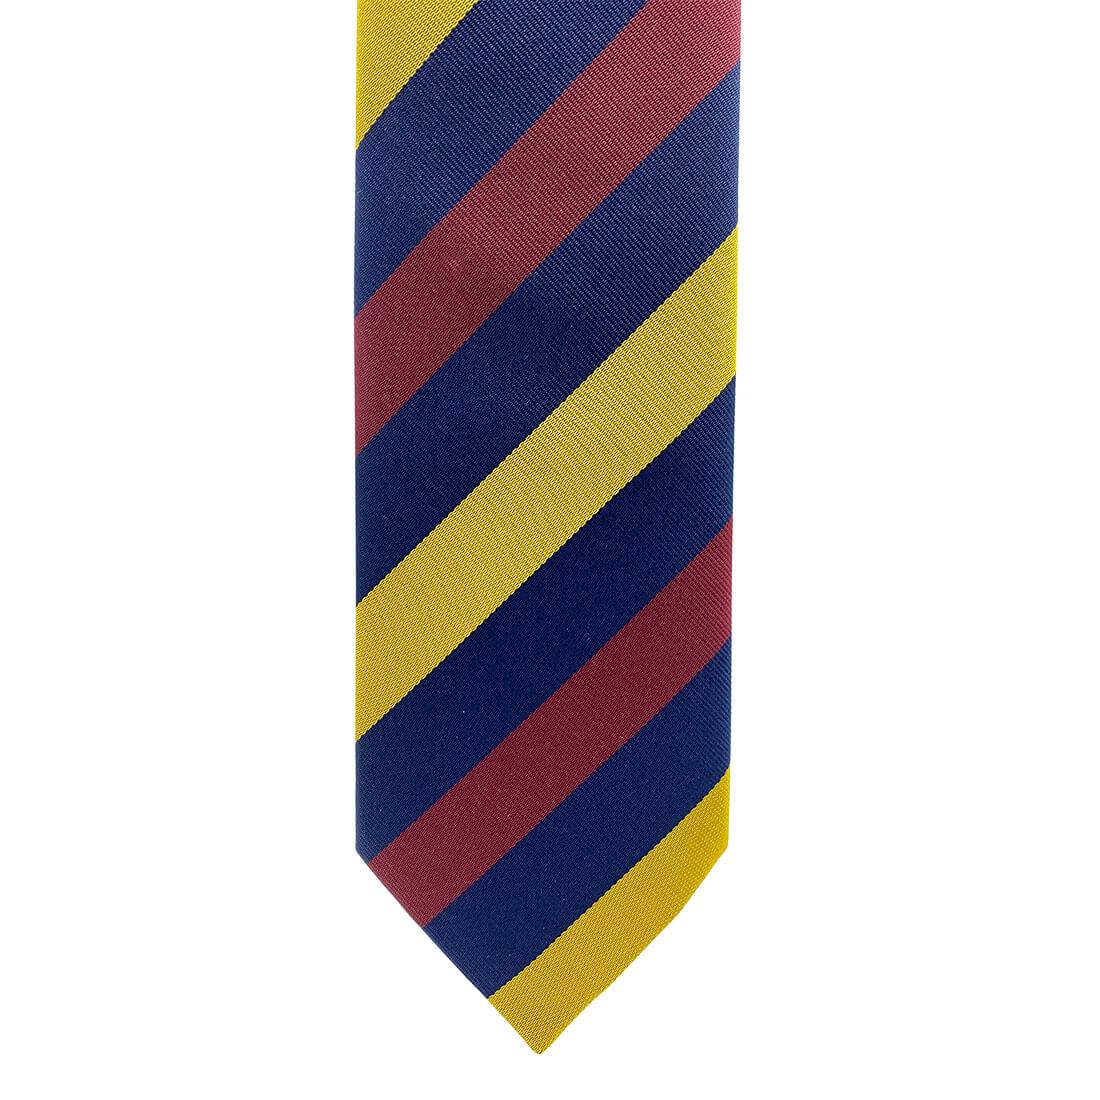 Royal Army Medical Corps Regimental Polyester Tie - John Bull Clothing